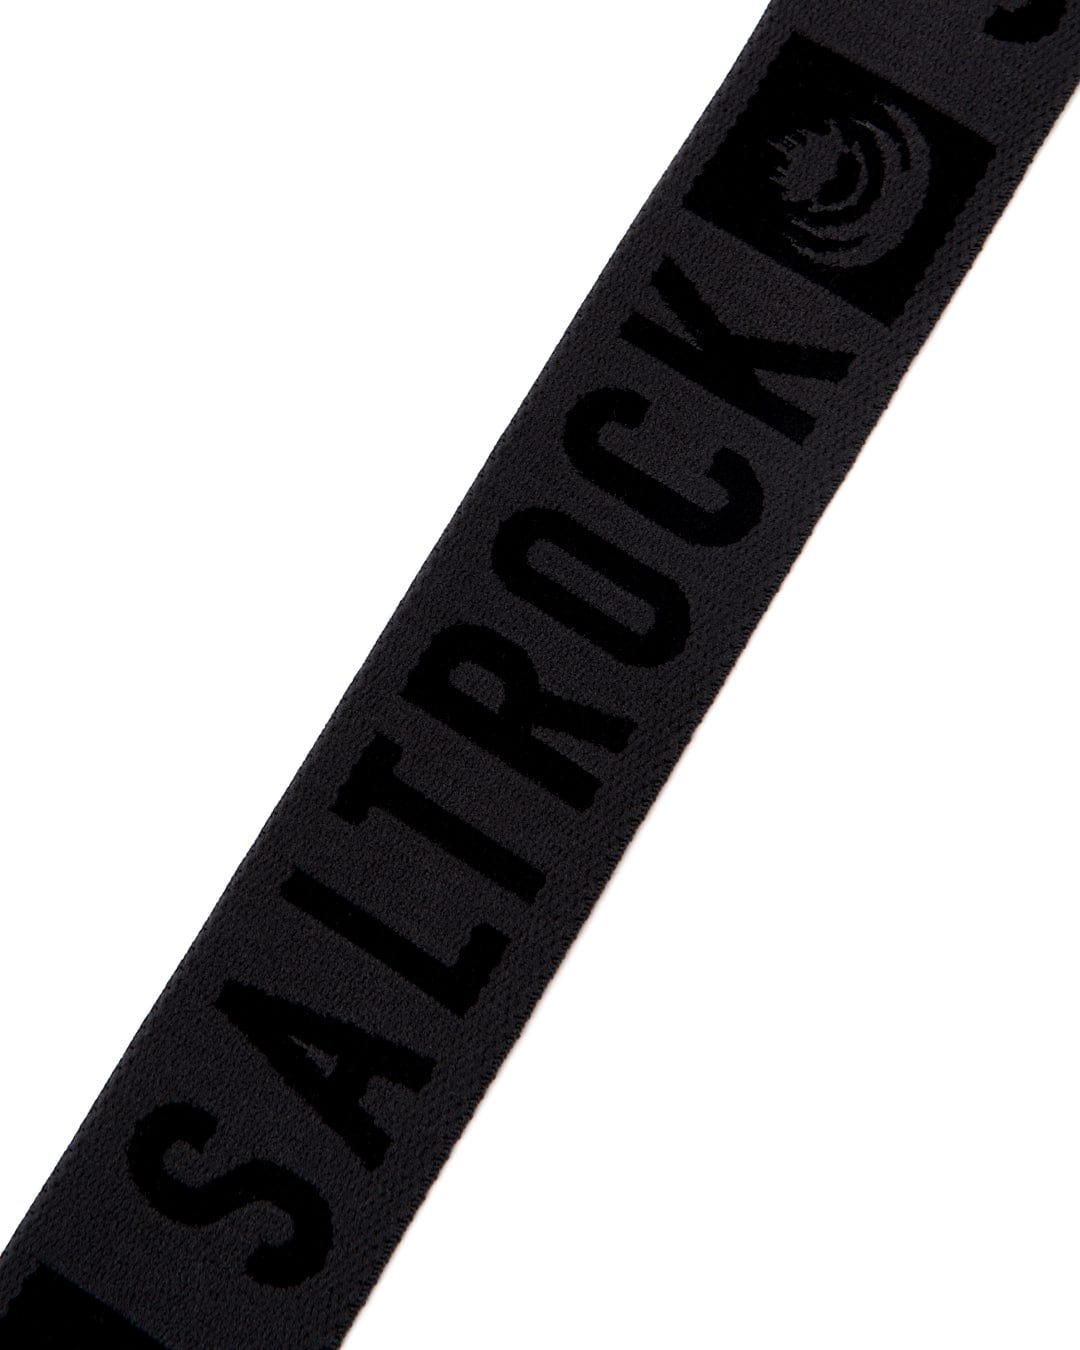 A Identity - Stretch Belt - Black with Saltrock branding and a metal clip buckle.